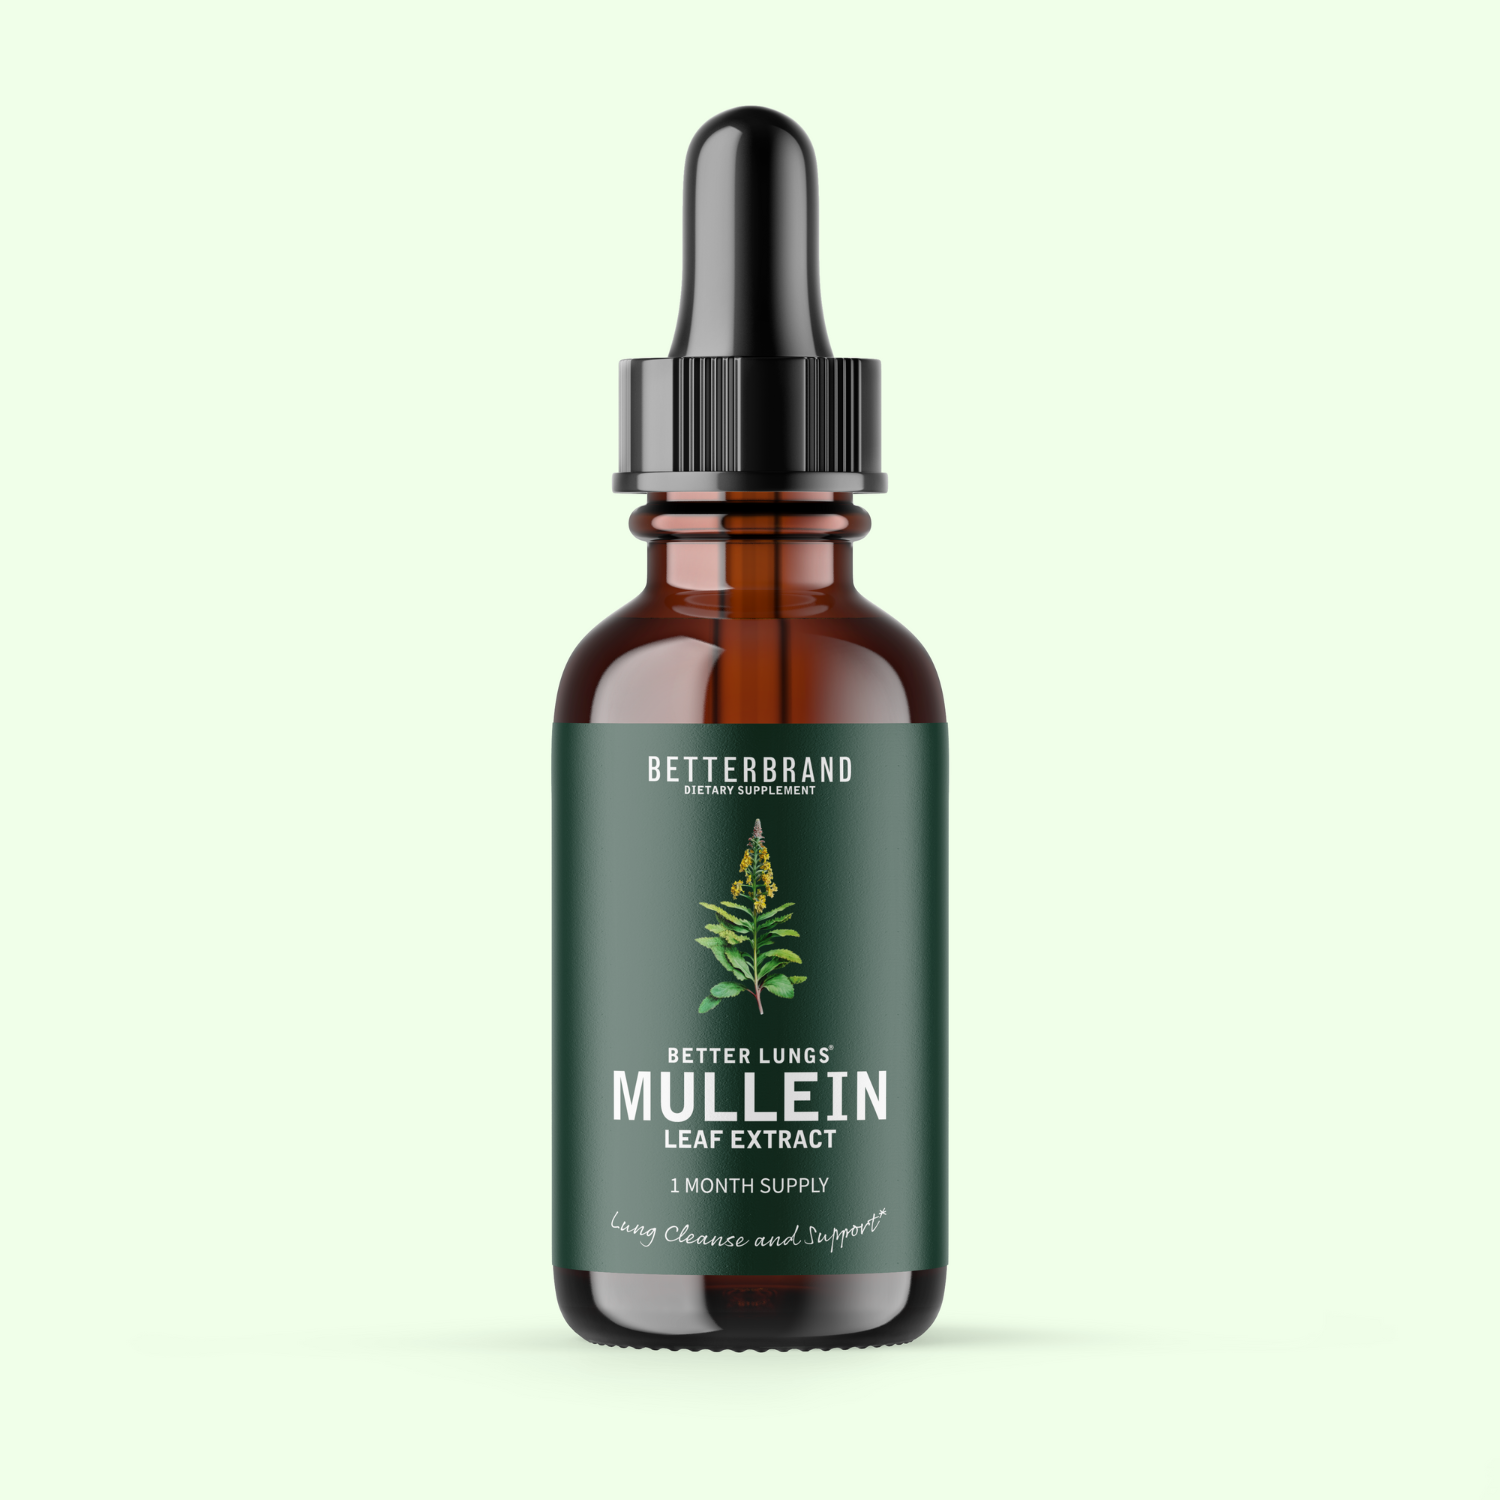 BetterLungs® Mullein Leaf Extract – Betterbrand - Mullein Drops